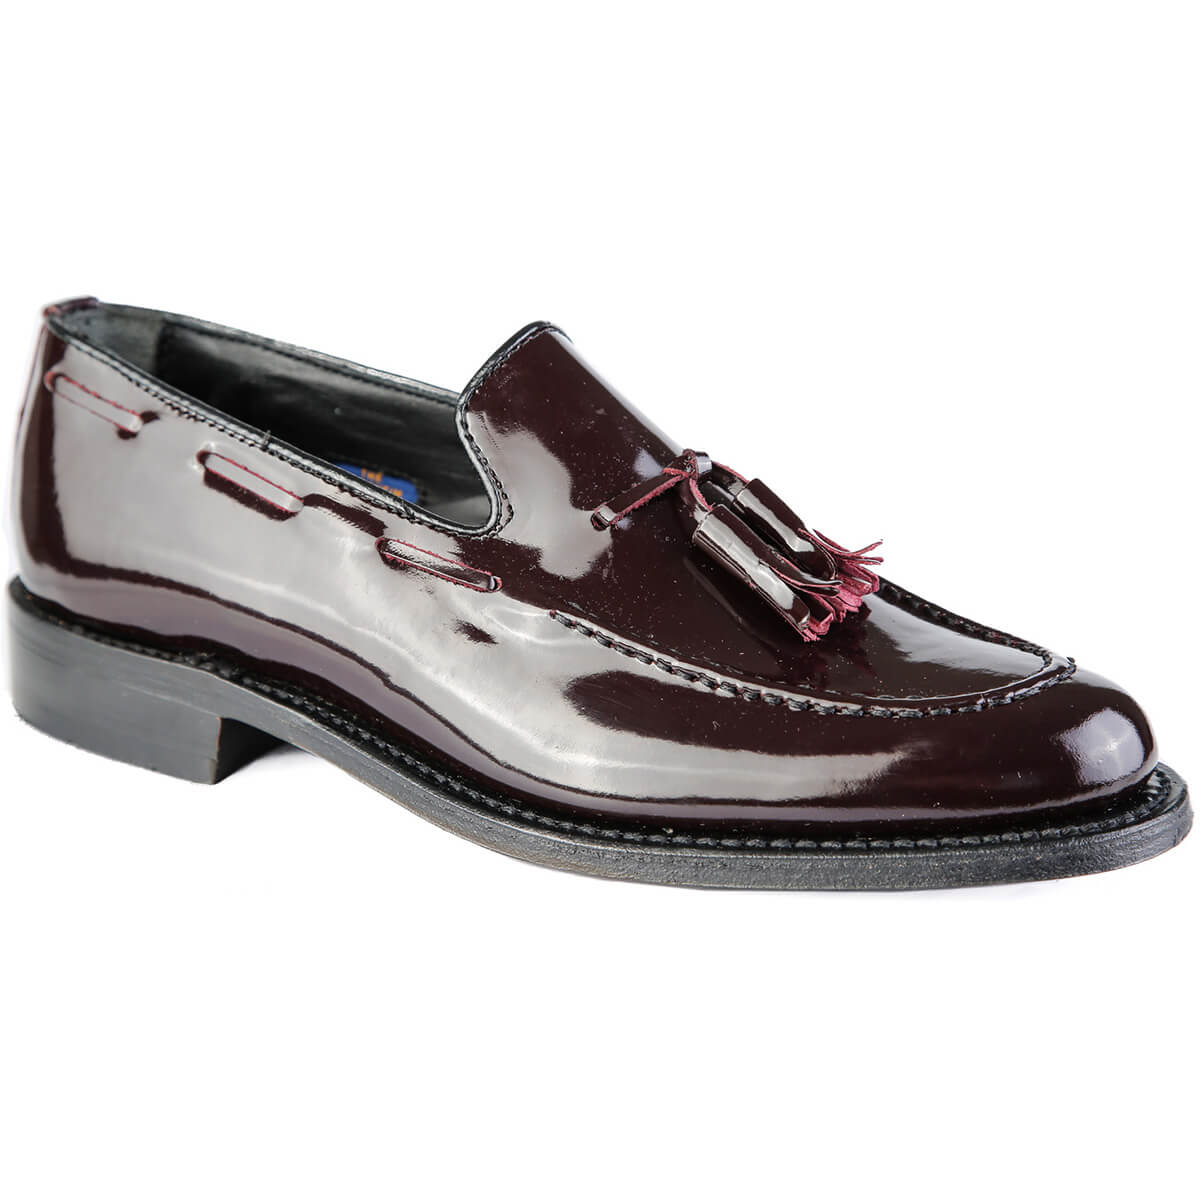 Outlet Men’s Shoes | Chocolate MOC TOE LOAFER | Florsheim TUSCANY